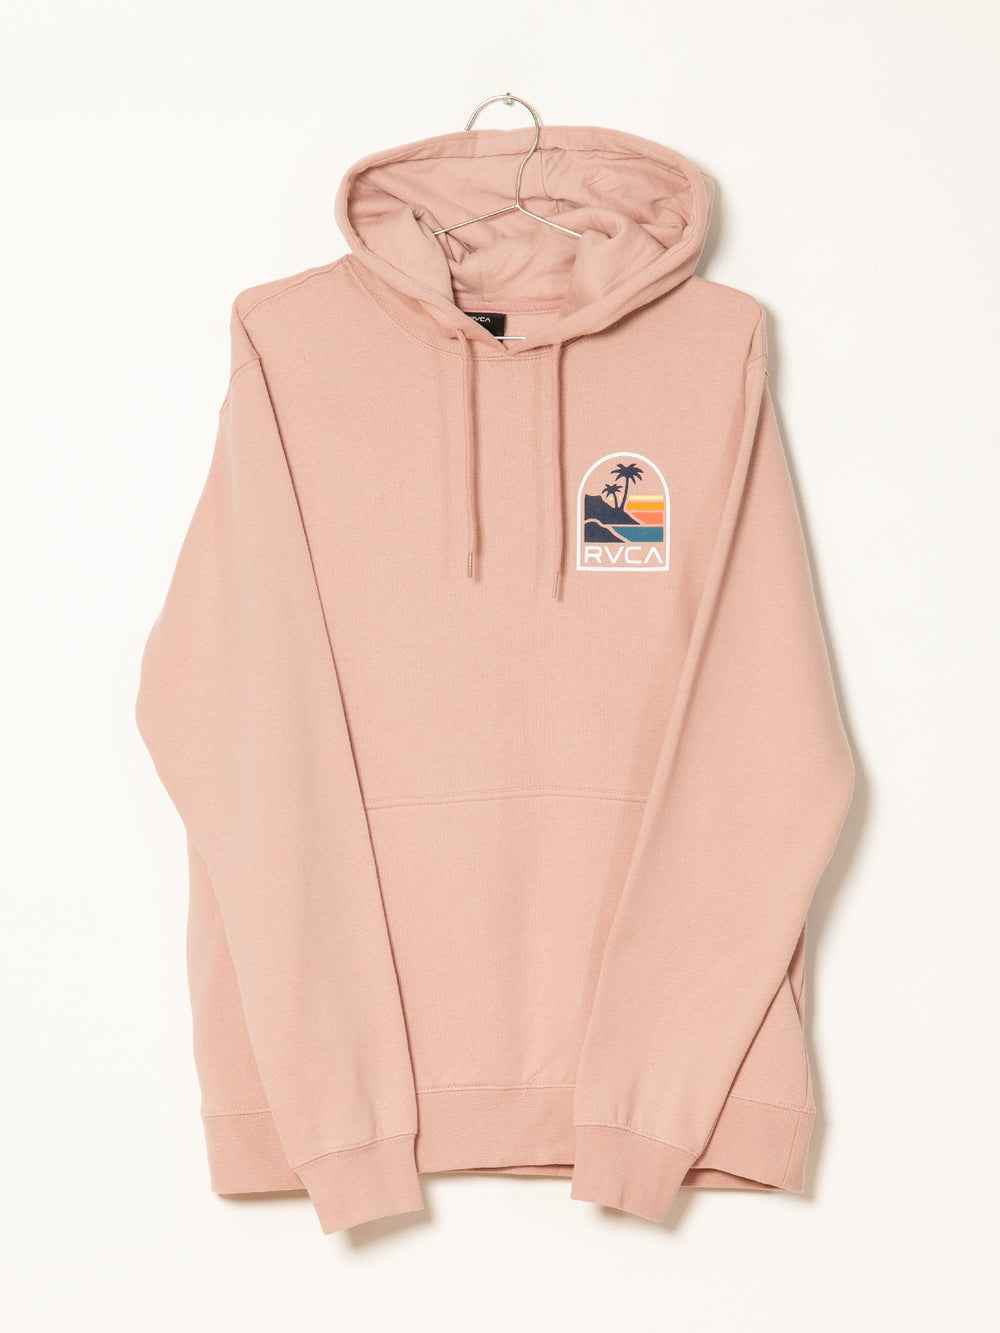 RVCA VISTA PULL OVER HOODIE - DÉSTOCKAGE